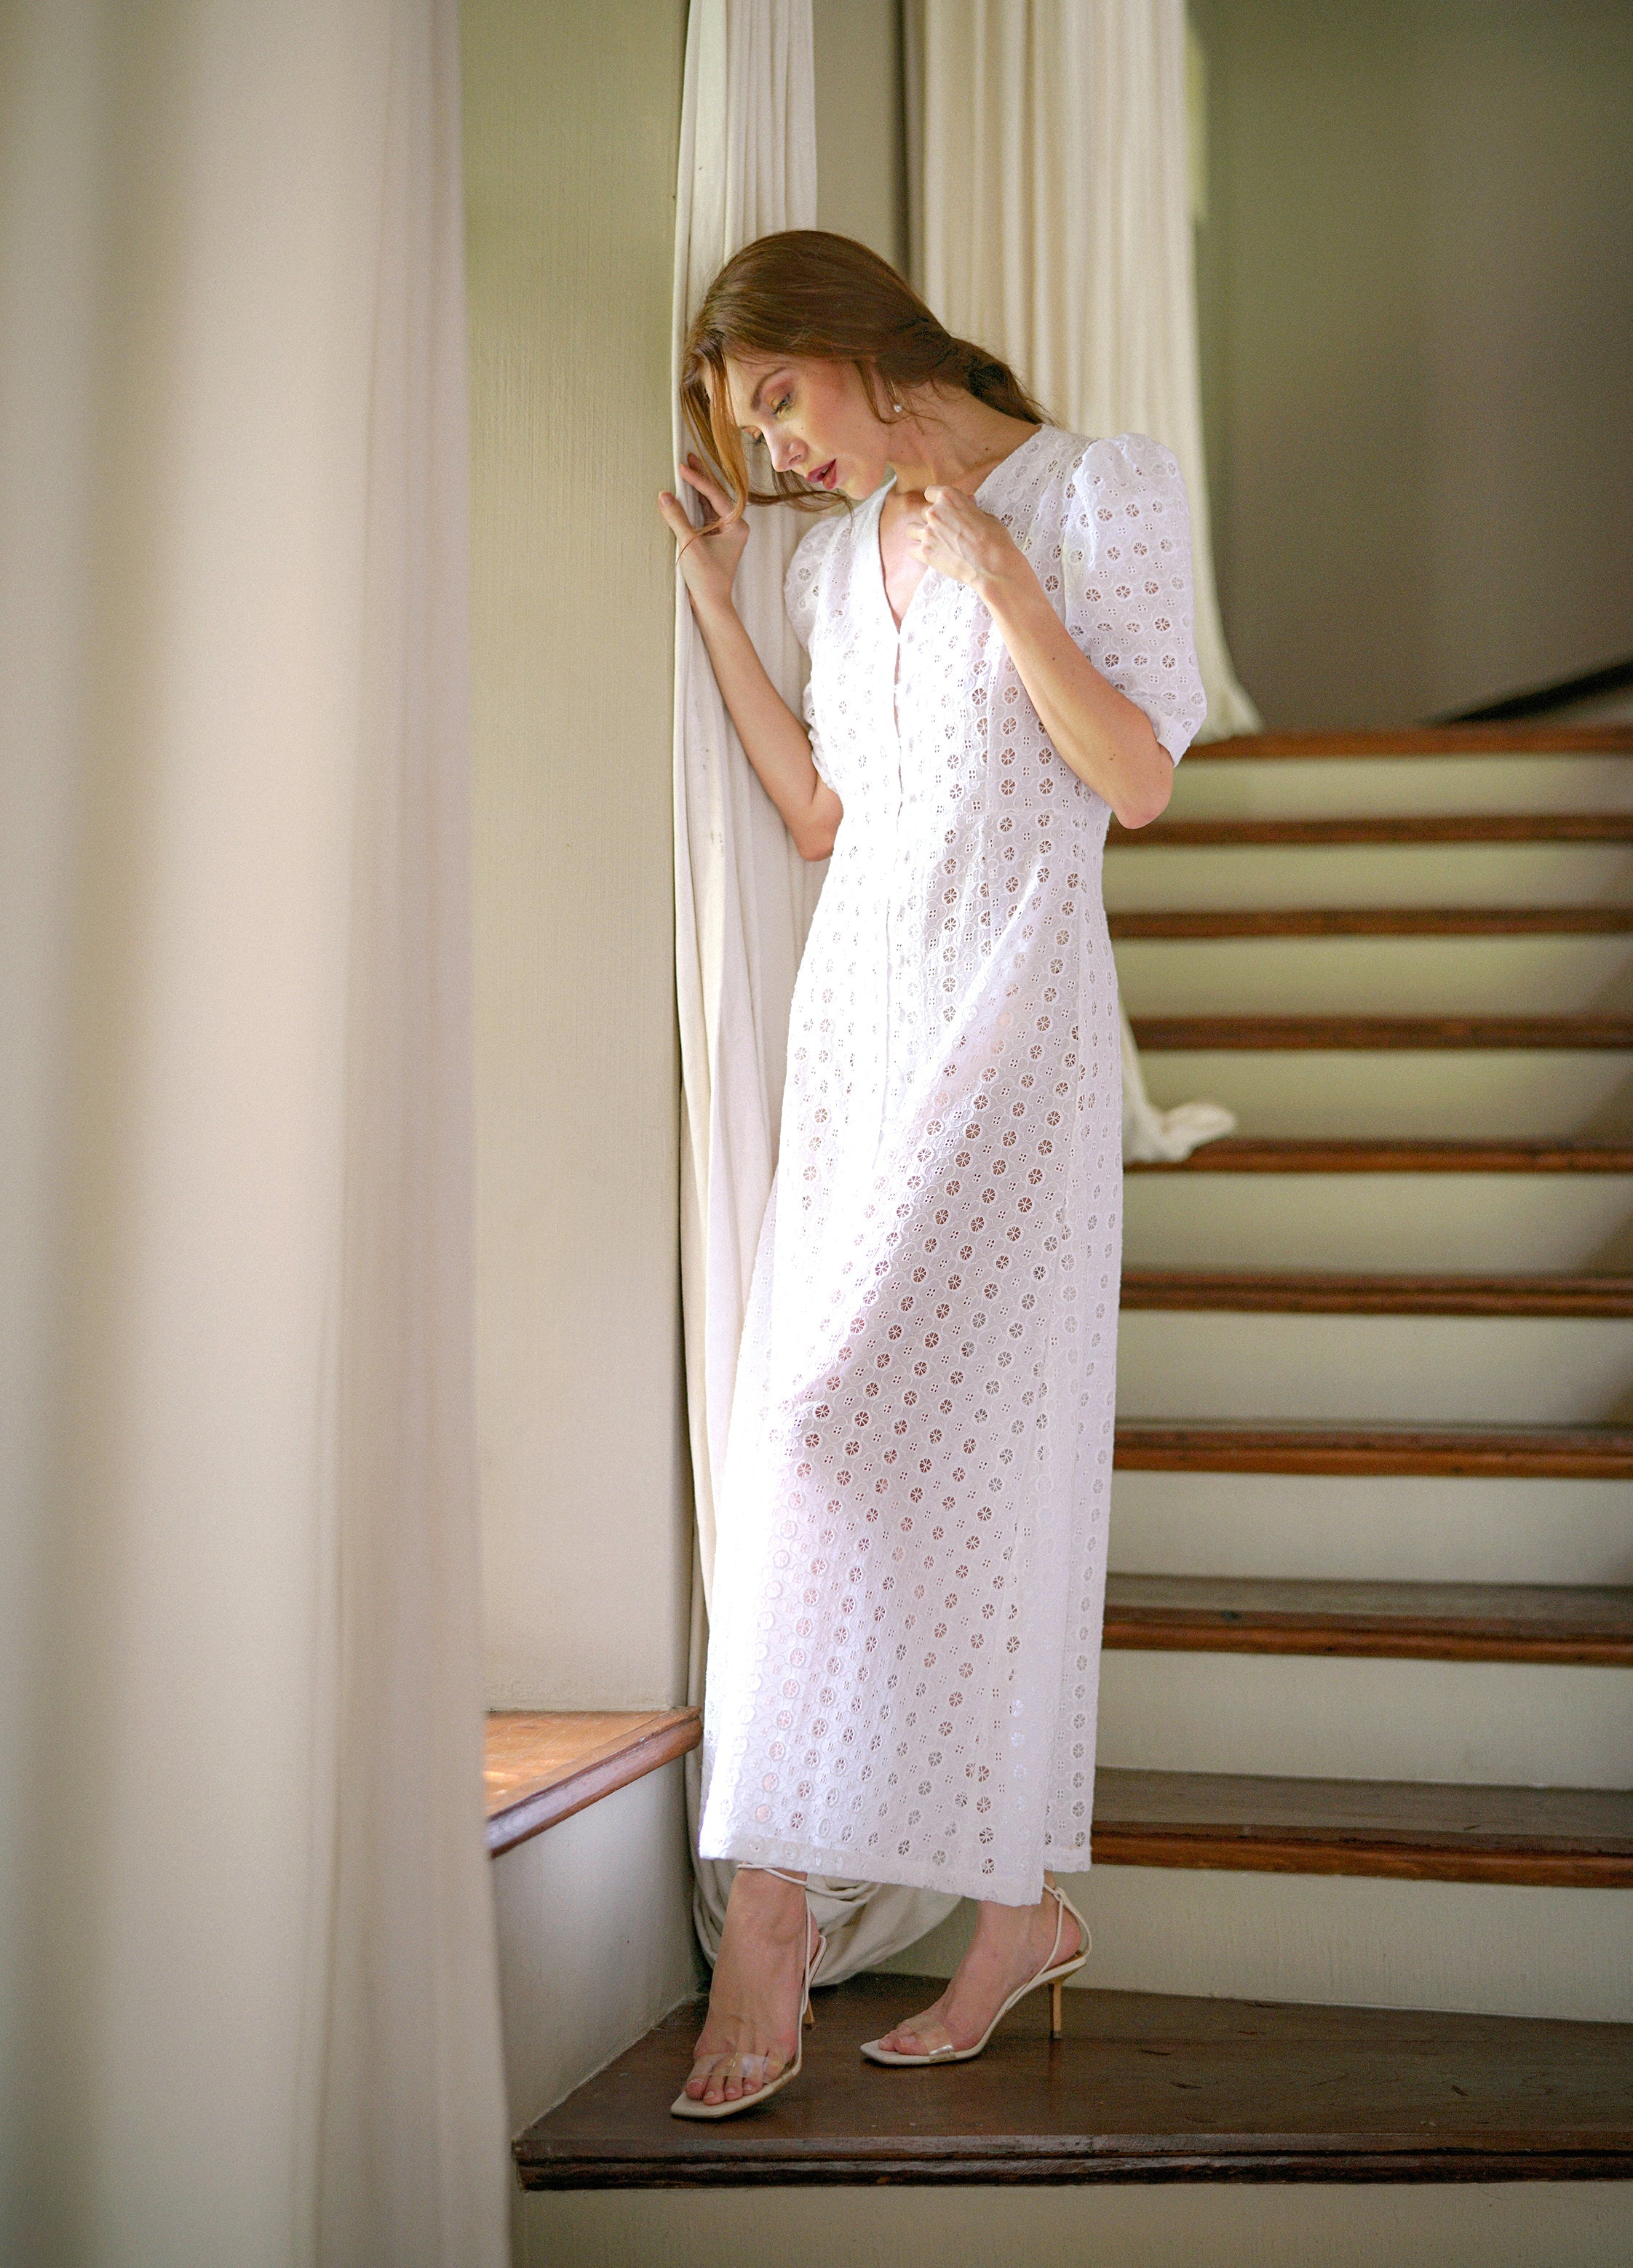  OLYMPIA Embroidered Cotton Dress by BrunnaCo BrunnaCo Perfumarie